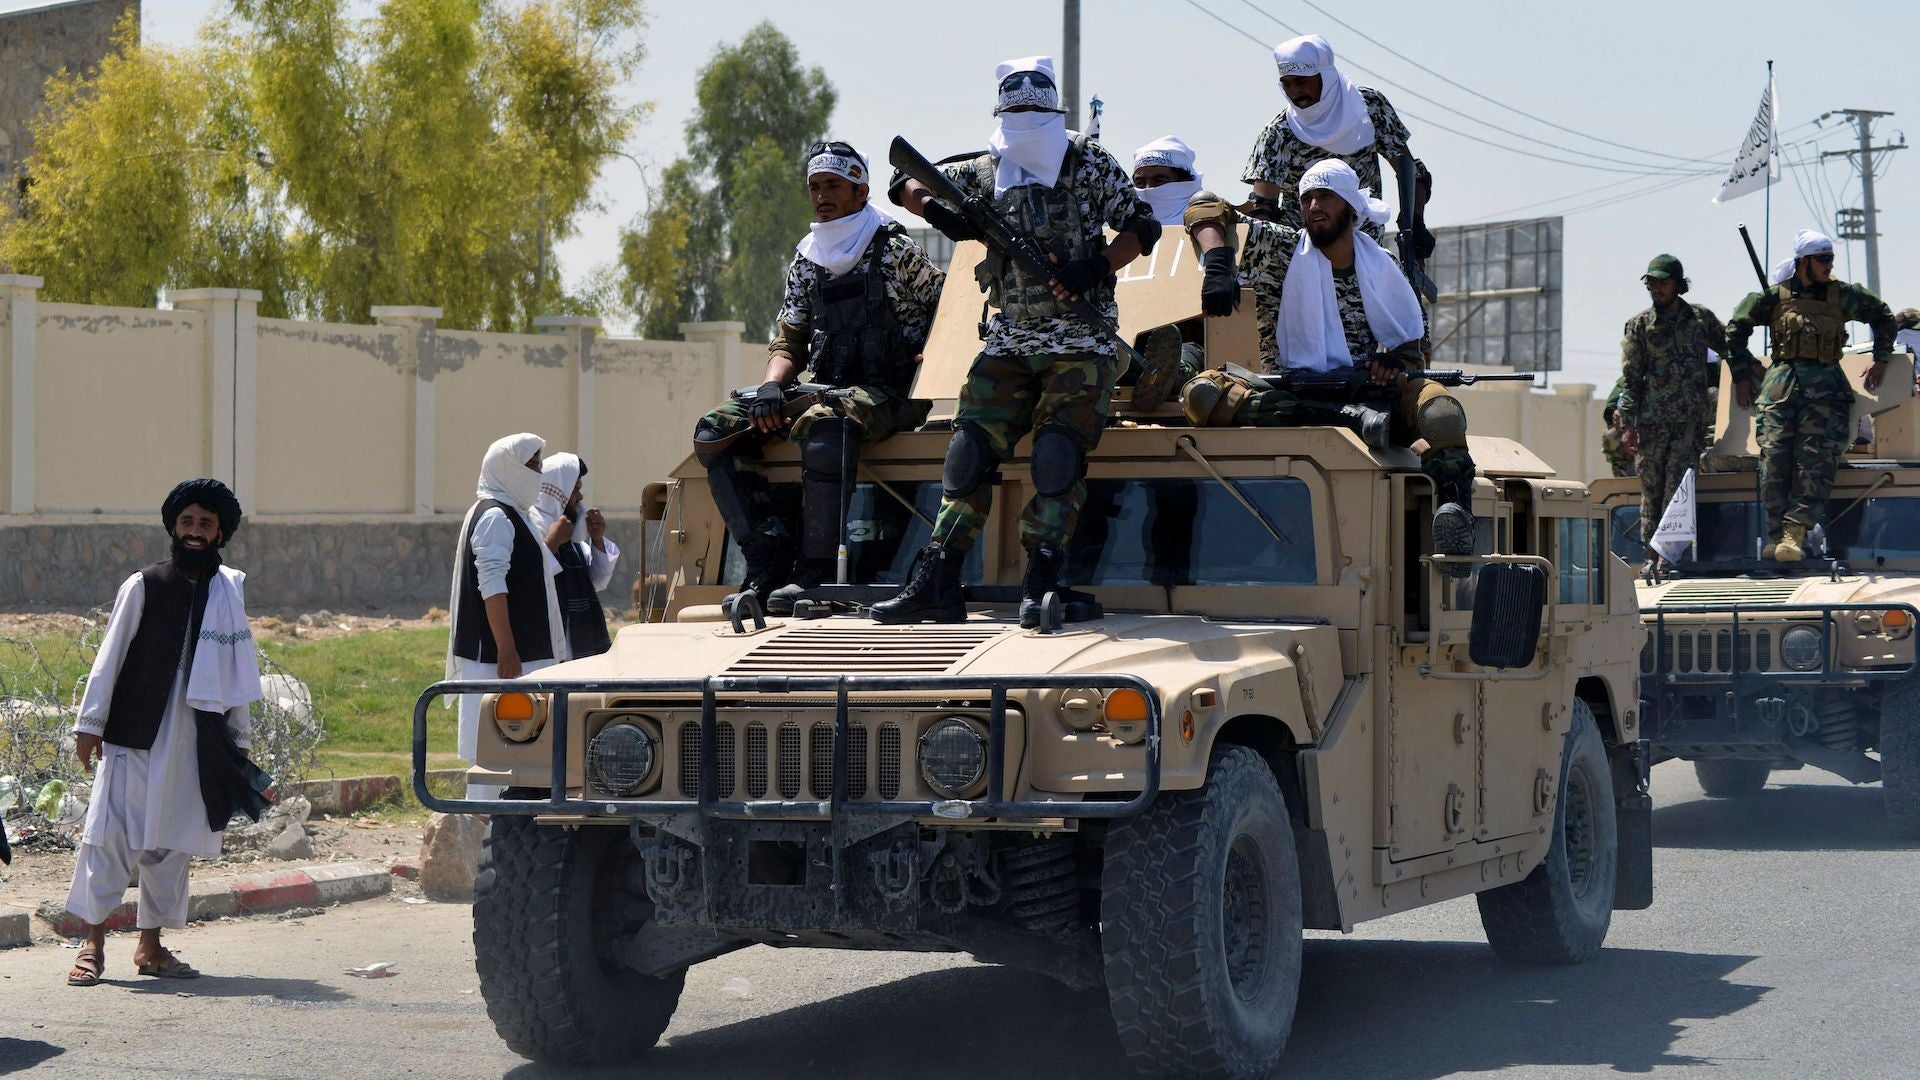 Taliban fighters atop Humvee vehicles parade along a road to celebrate after the US pulled all its troops out of Afghanistan, in Kandahar on September 1, 2021 following the Talibans military takeover of the country. 